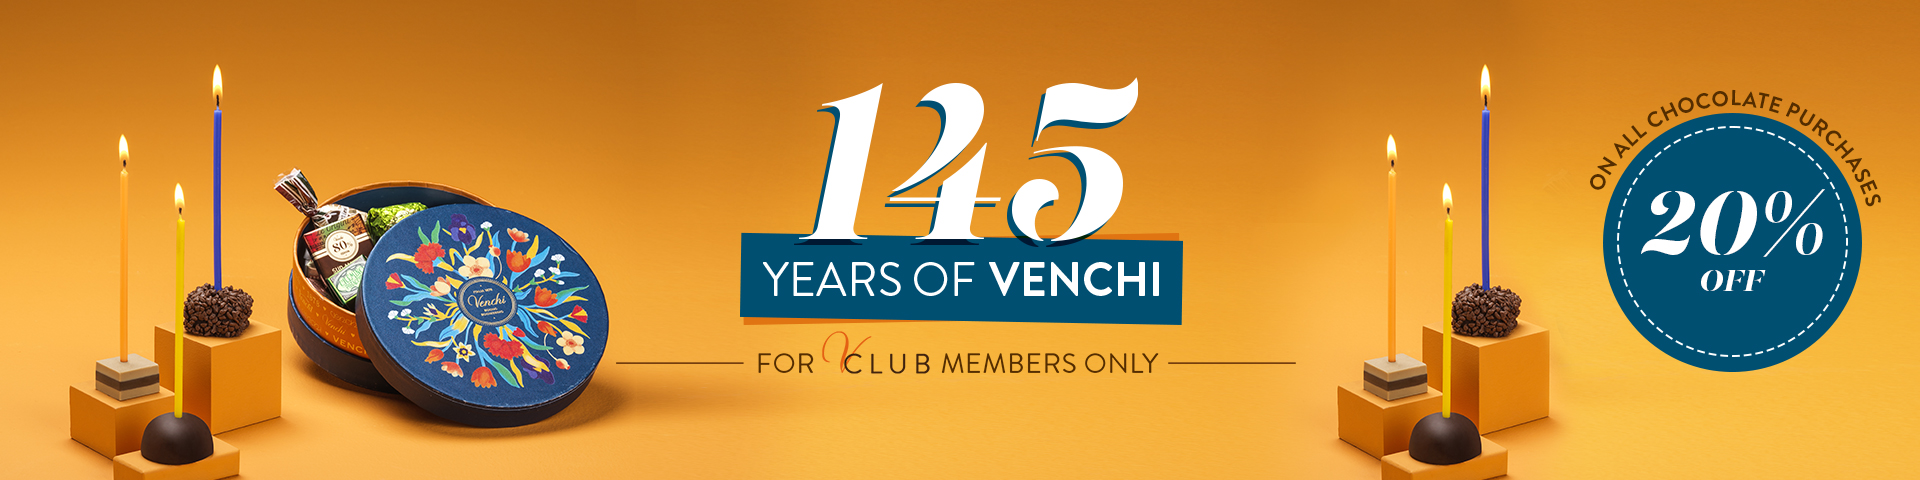 145 years of Venchi - 20% off on all chocolate purchases for V-Club members only